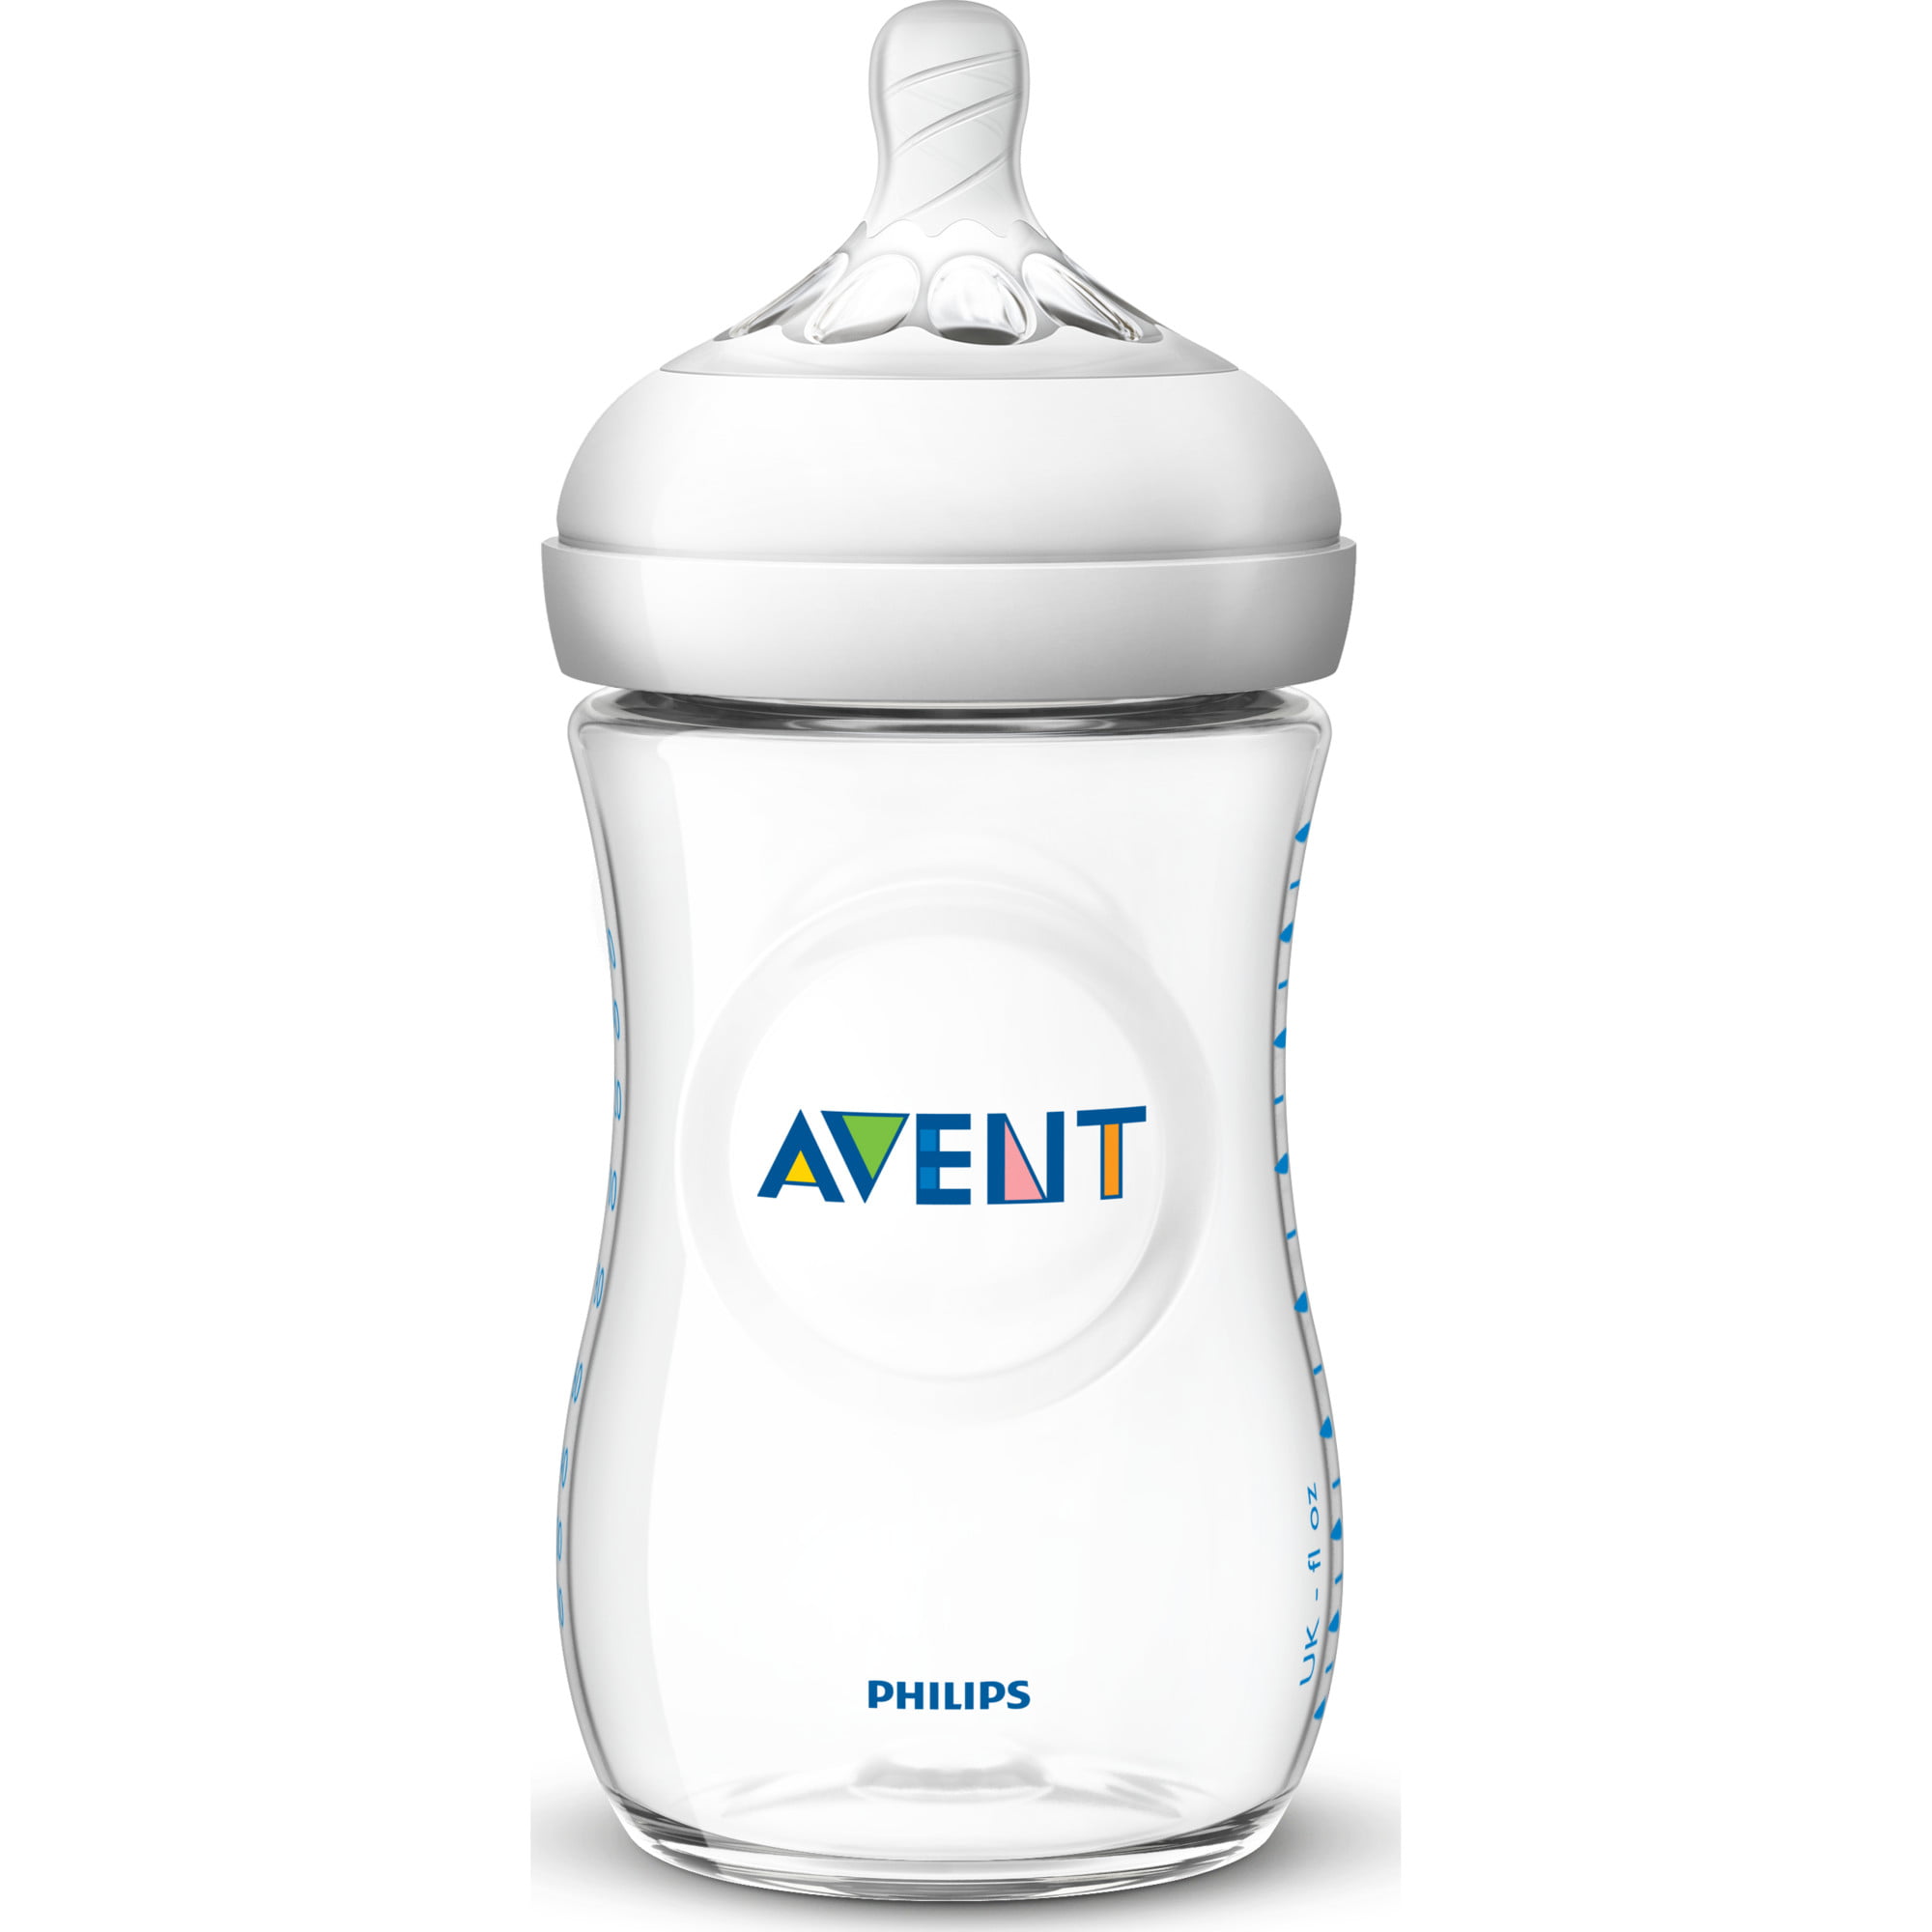 9 Oz Colors Vary Philips Avent Bottle BPA Free Pack of 2 3 Wide Neck Bottles